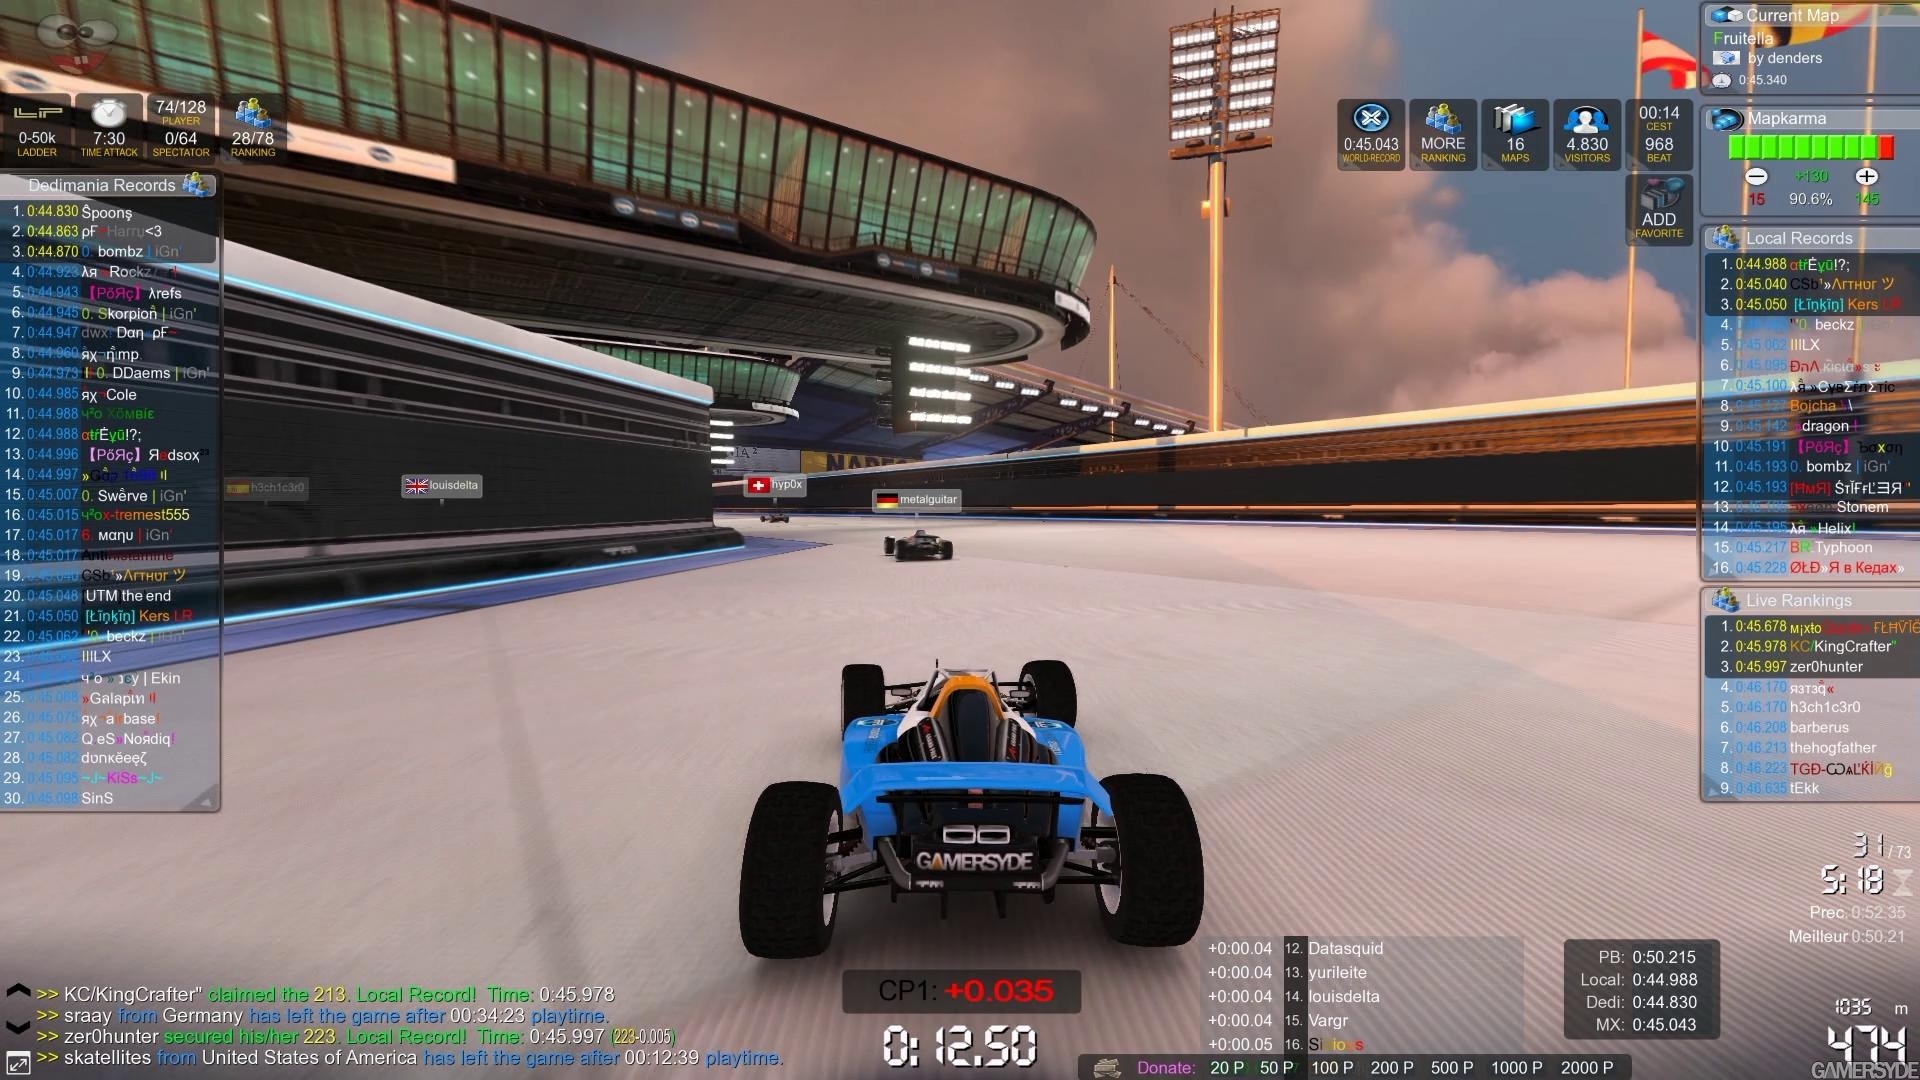 trackmania 2 stadium could not contact server